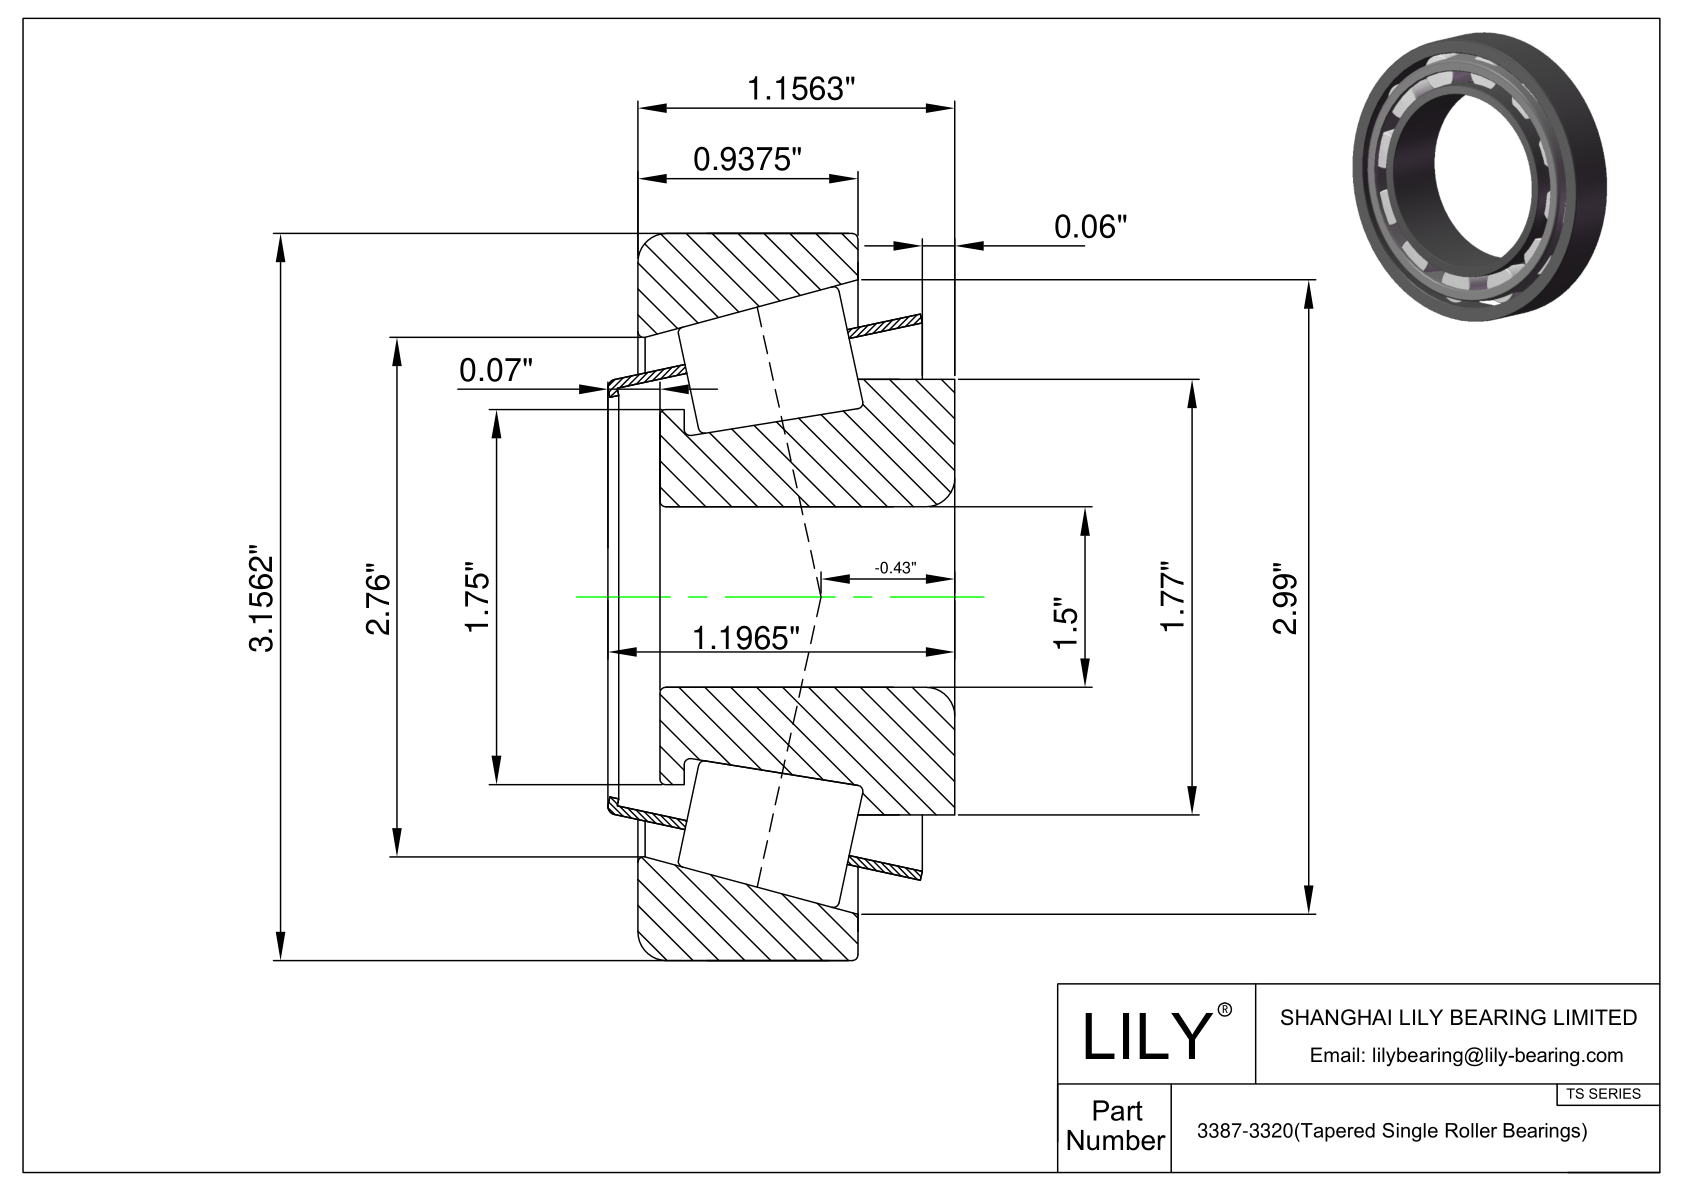 3387-3320 TS (Tapered Single Roller Bearings) (Imperial) cad drawing